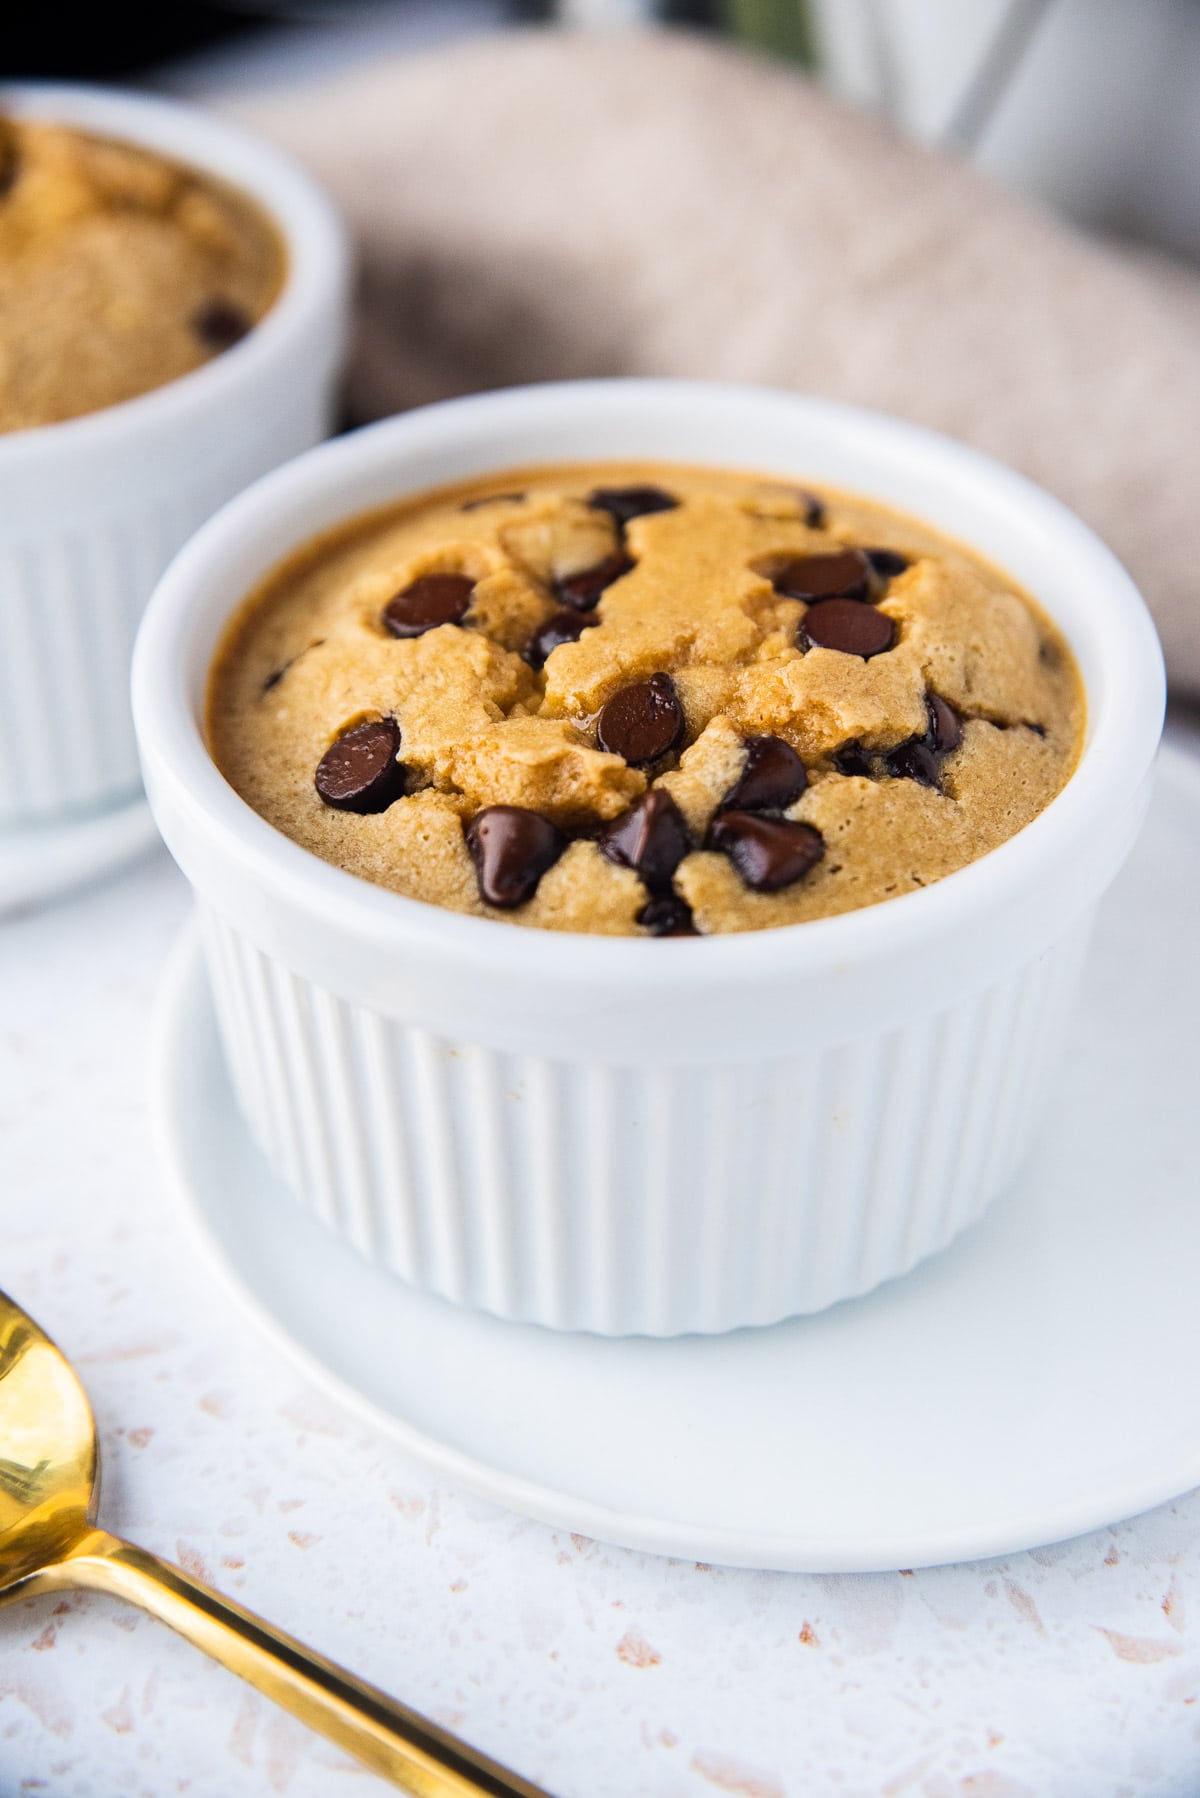 Chocolate Chip Blended Baked Oats in a white ramekin